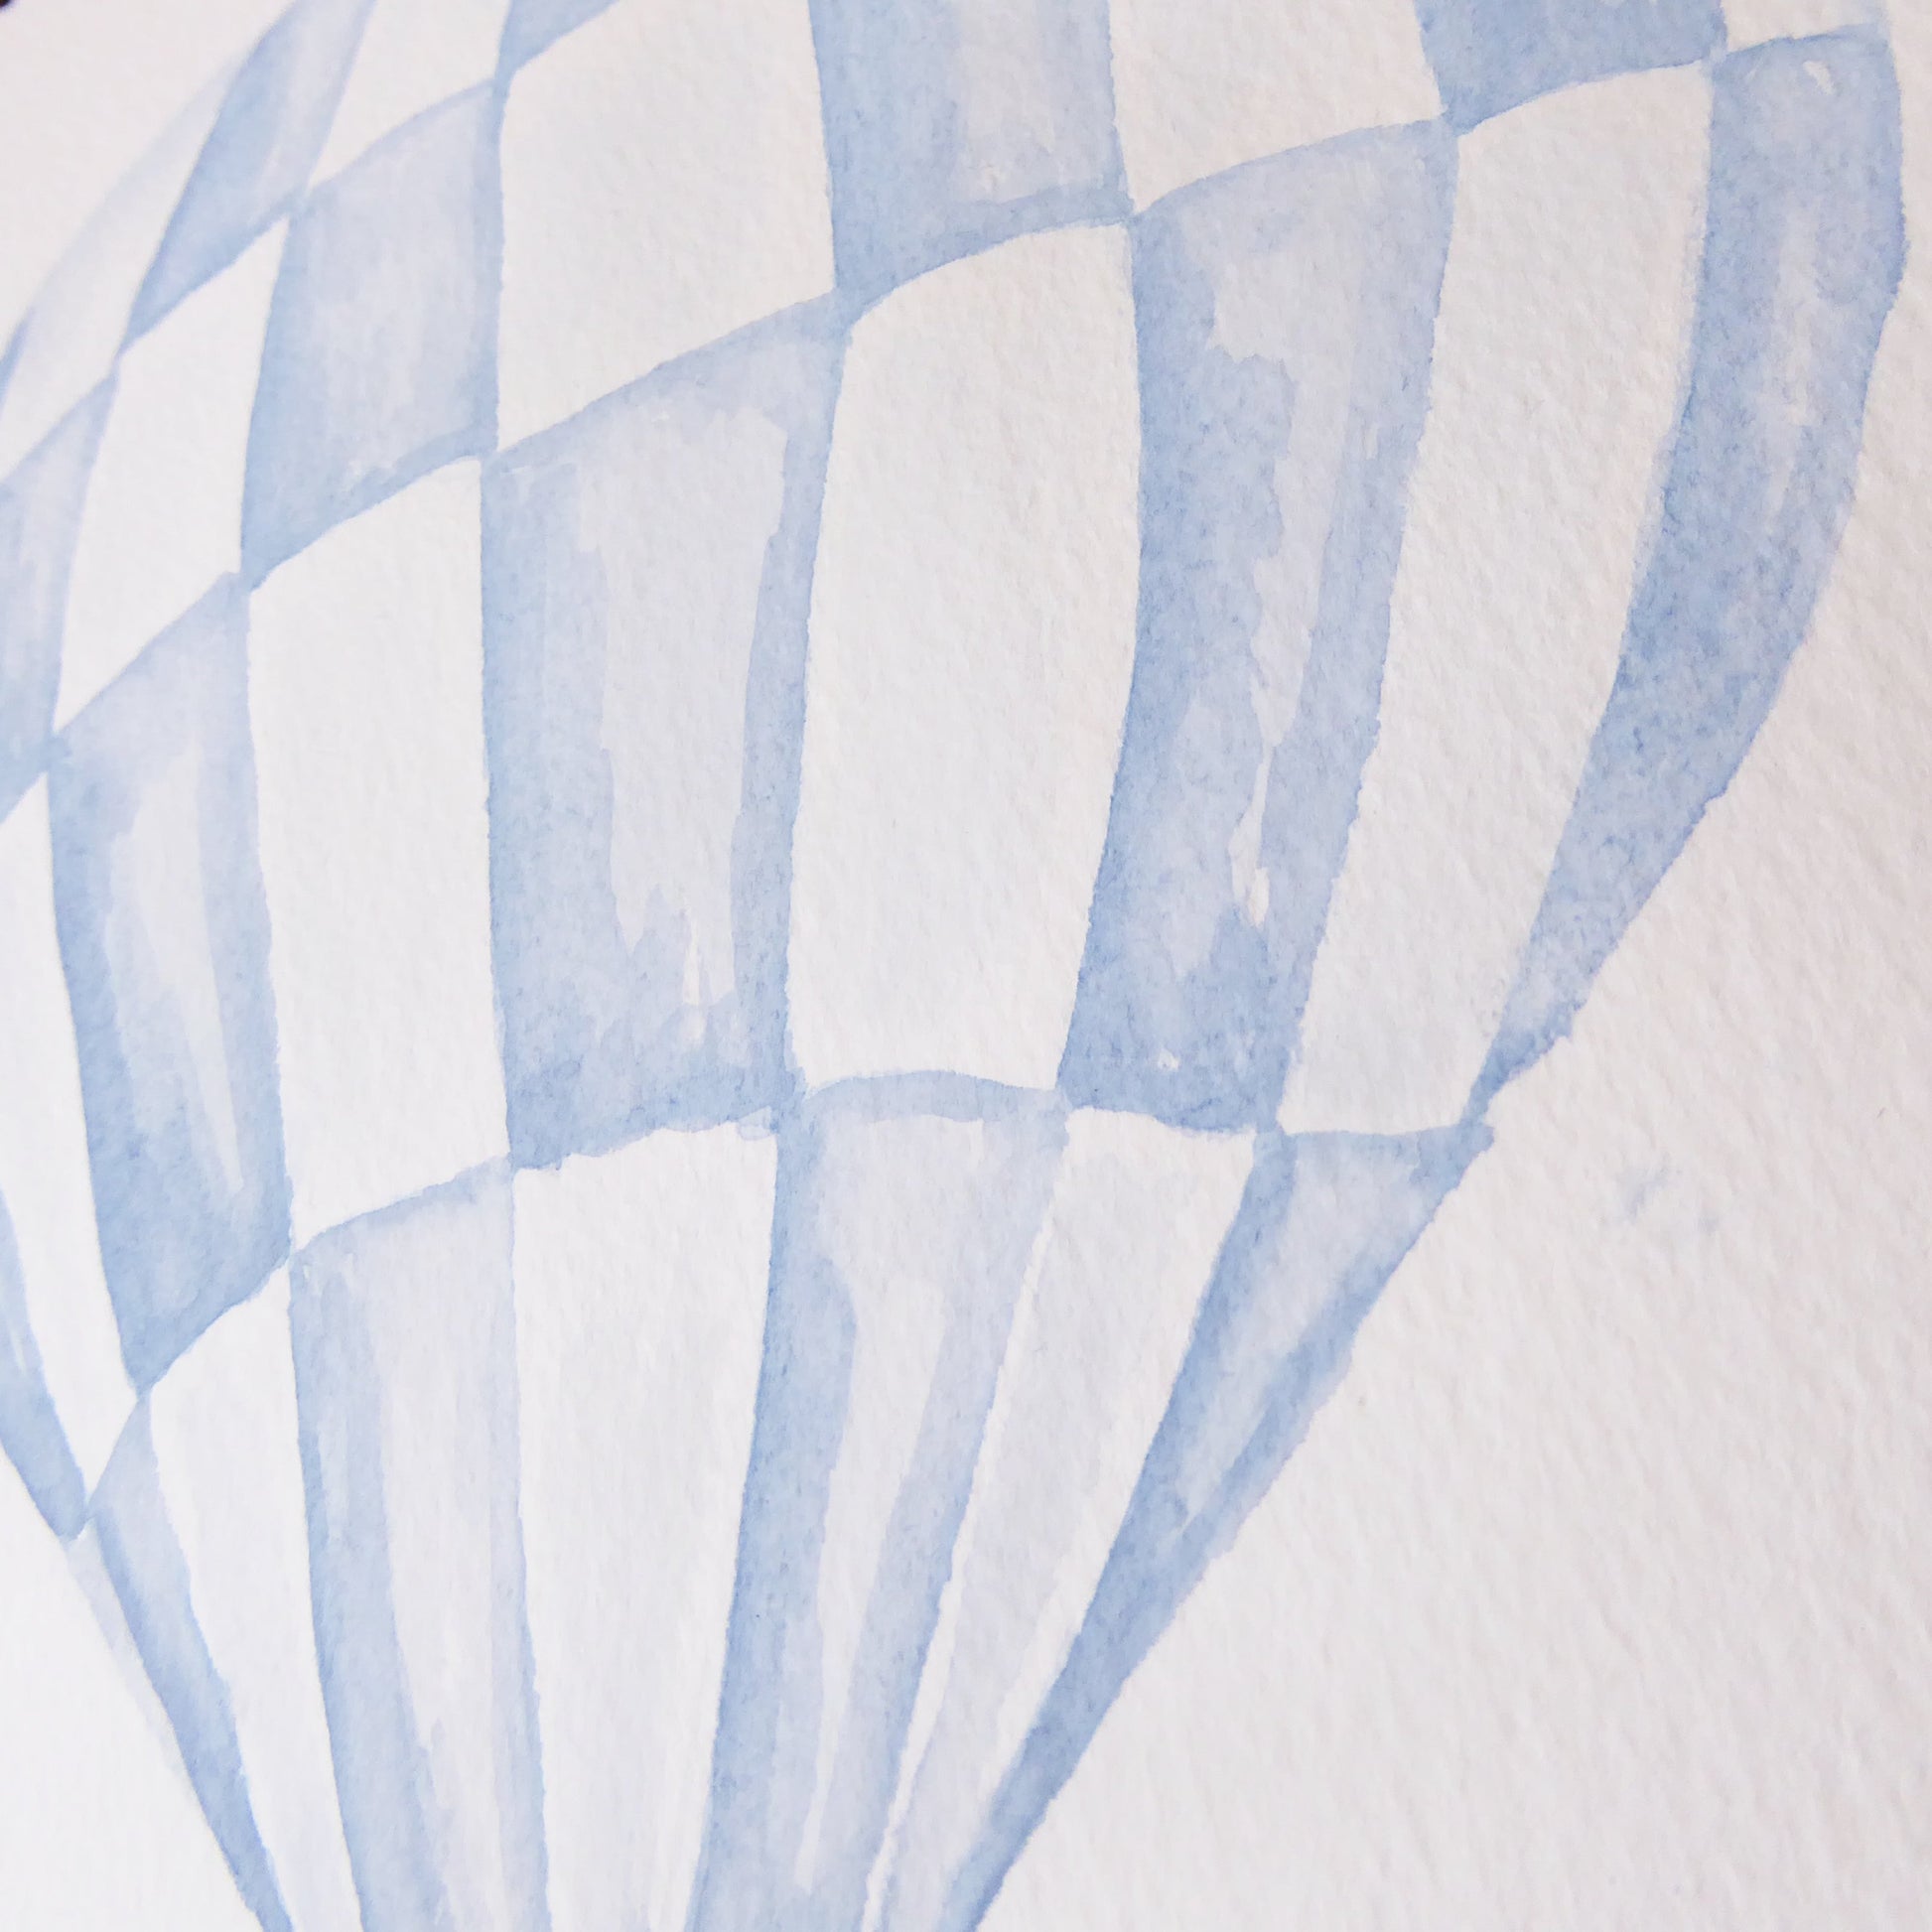 Watercolour hot air balloons | Fabric wall stickers - Adnil Creations